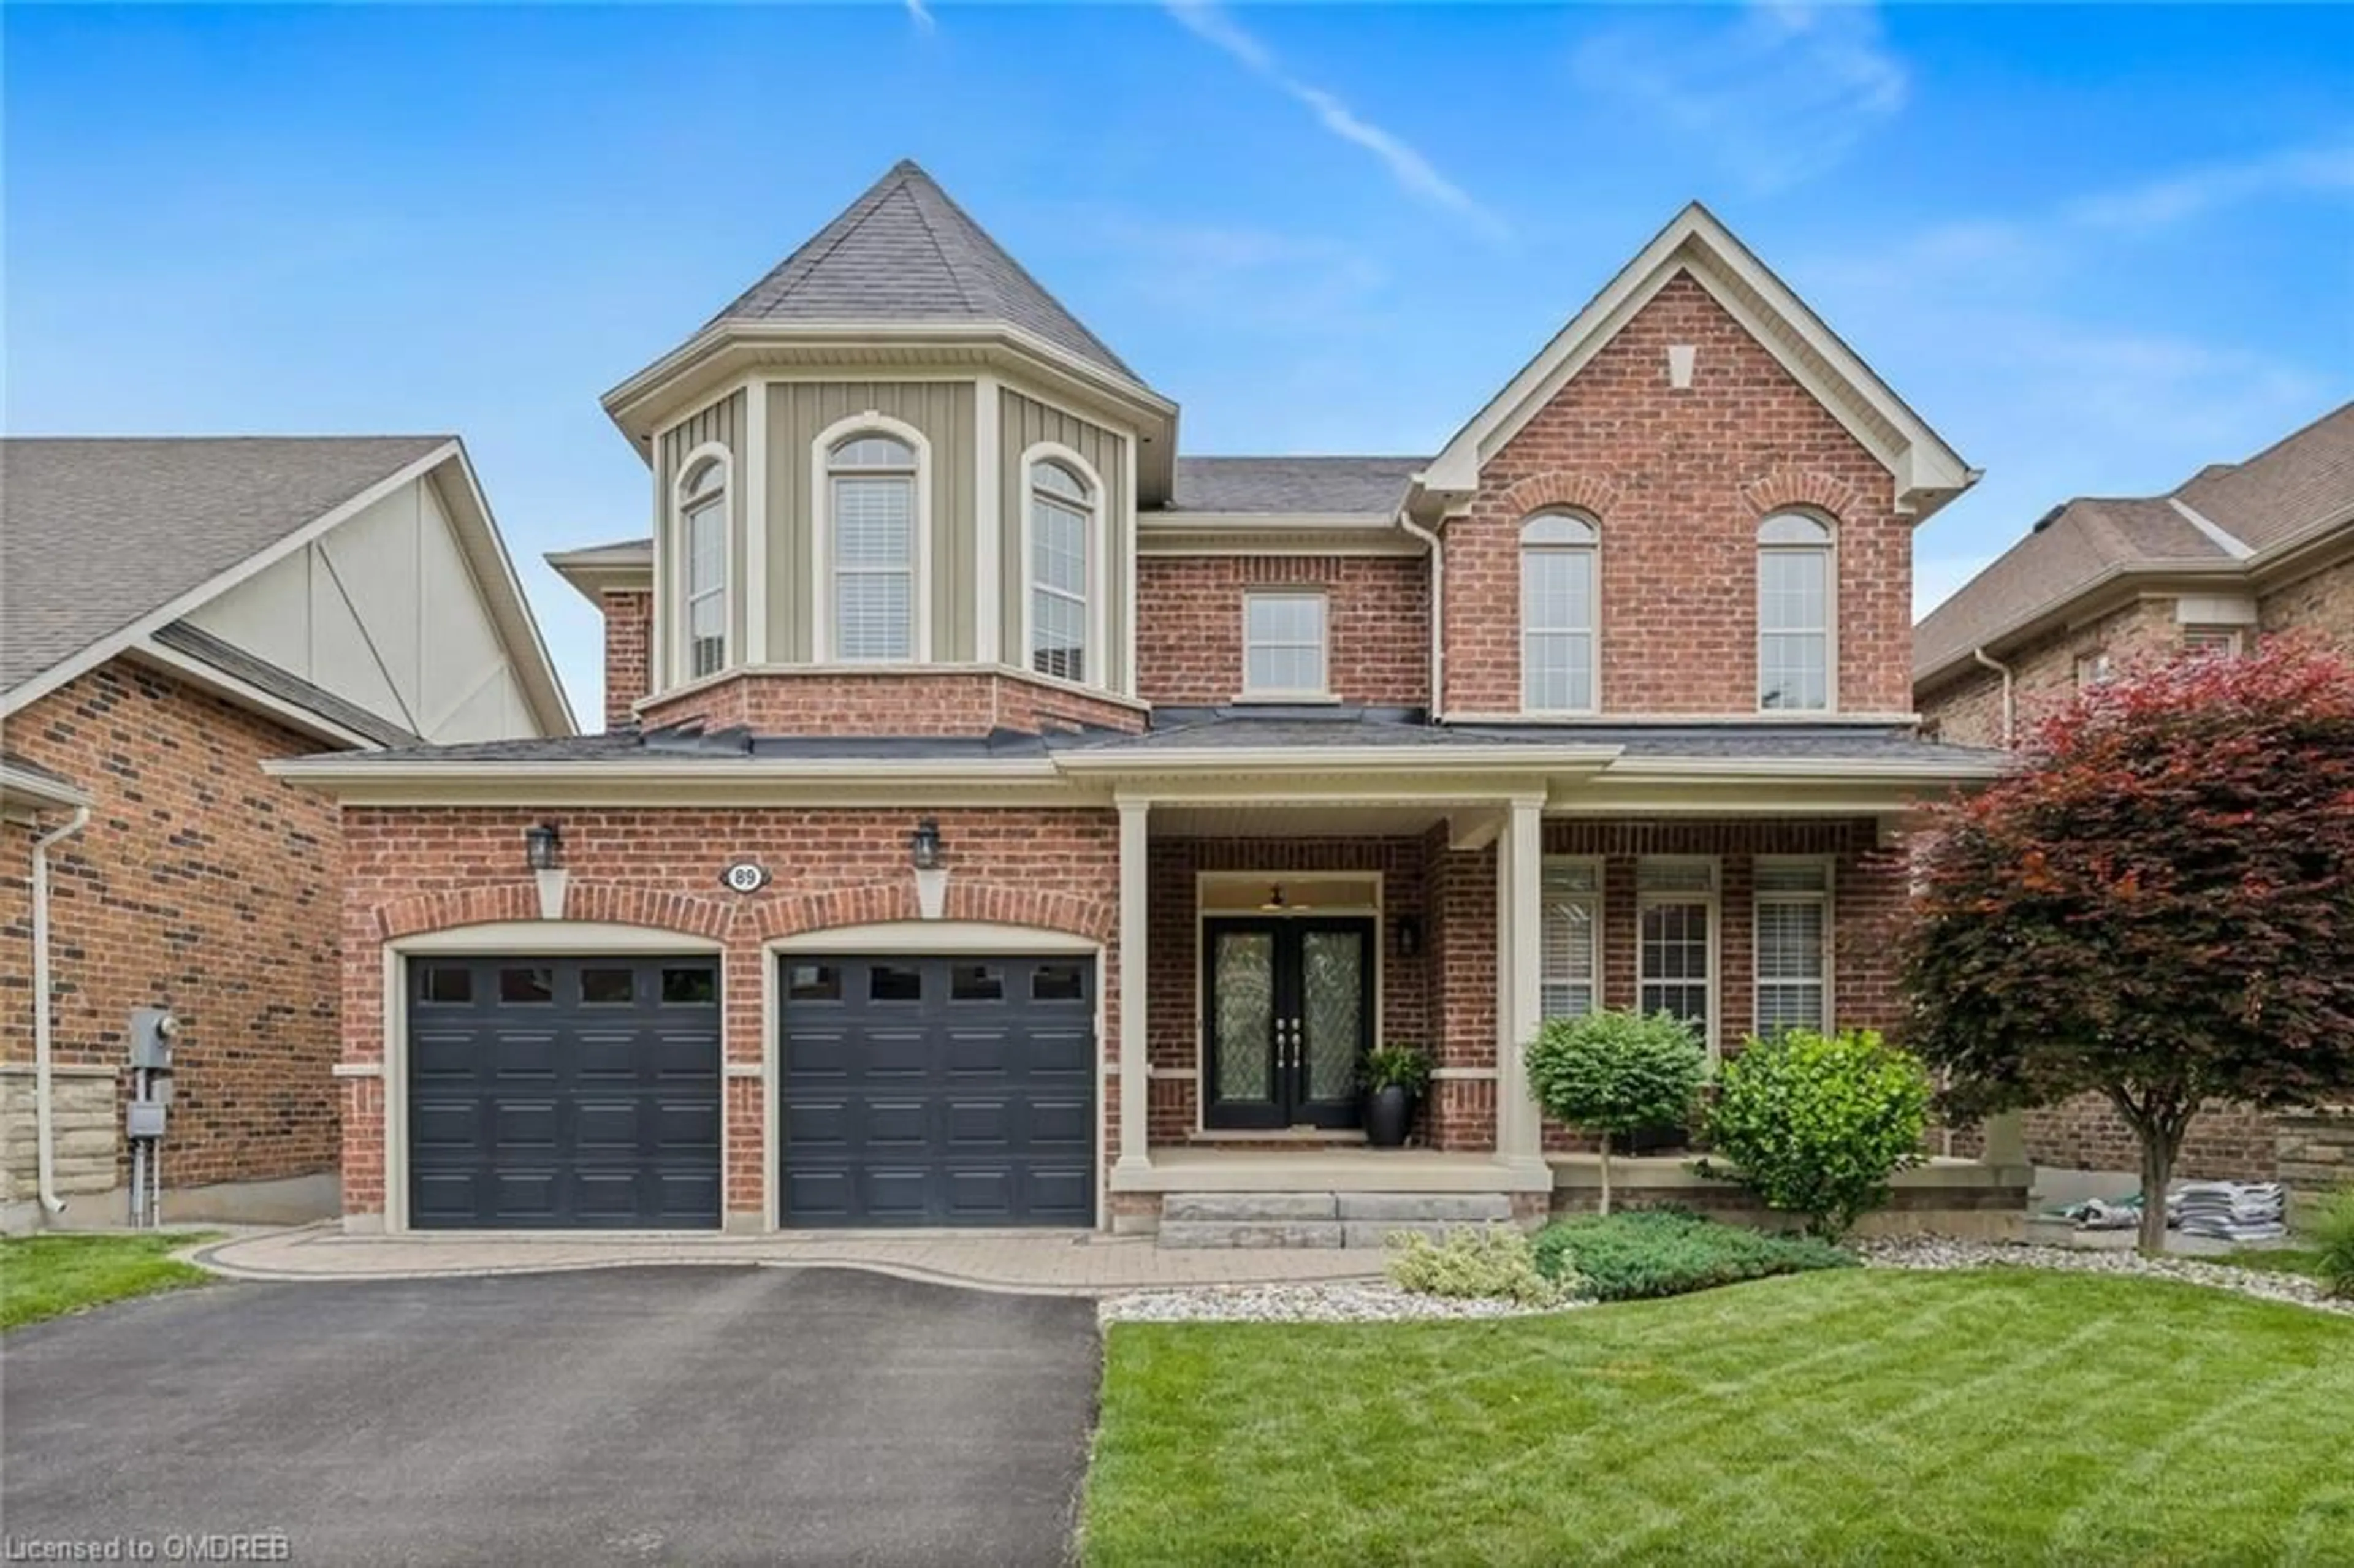 Home with brick exterior material for 89 Foxtail Crt, Georgetown Ontario L7G 0G2